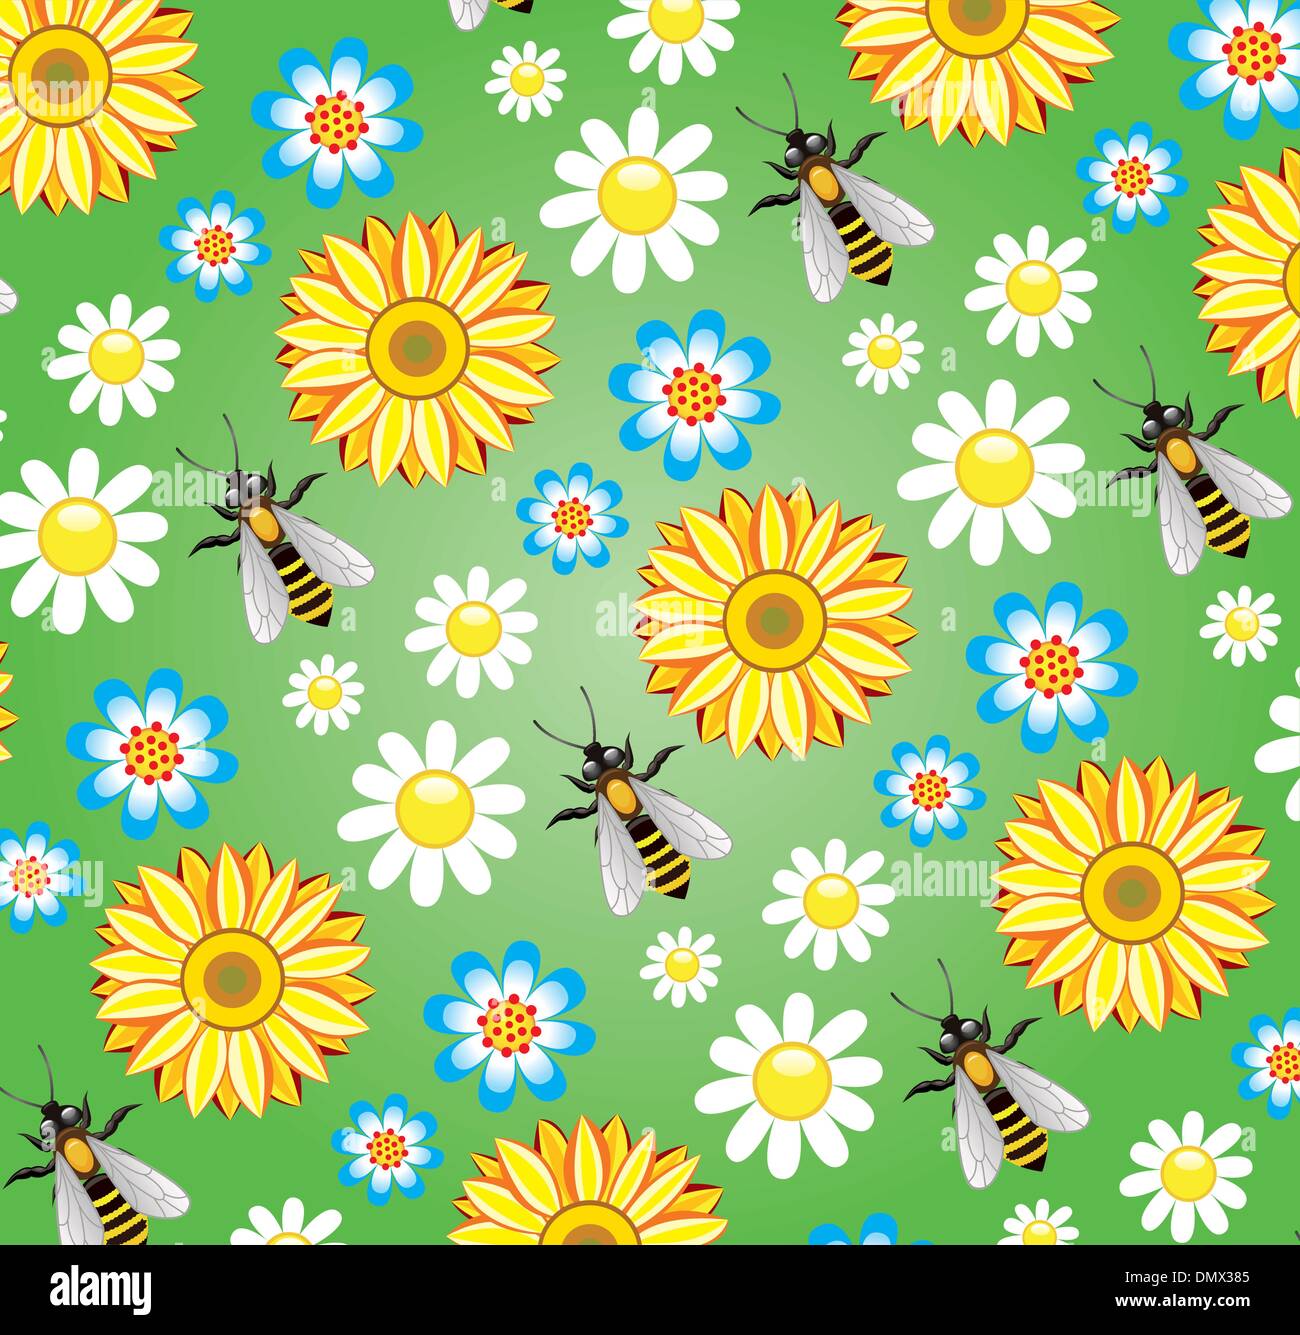 vector seamless background with bees and flowers Stock Vector